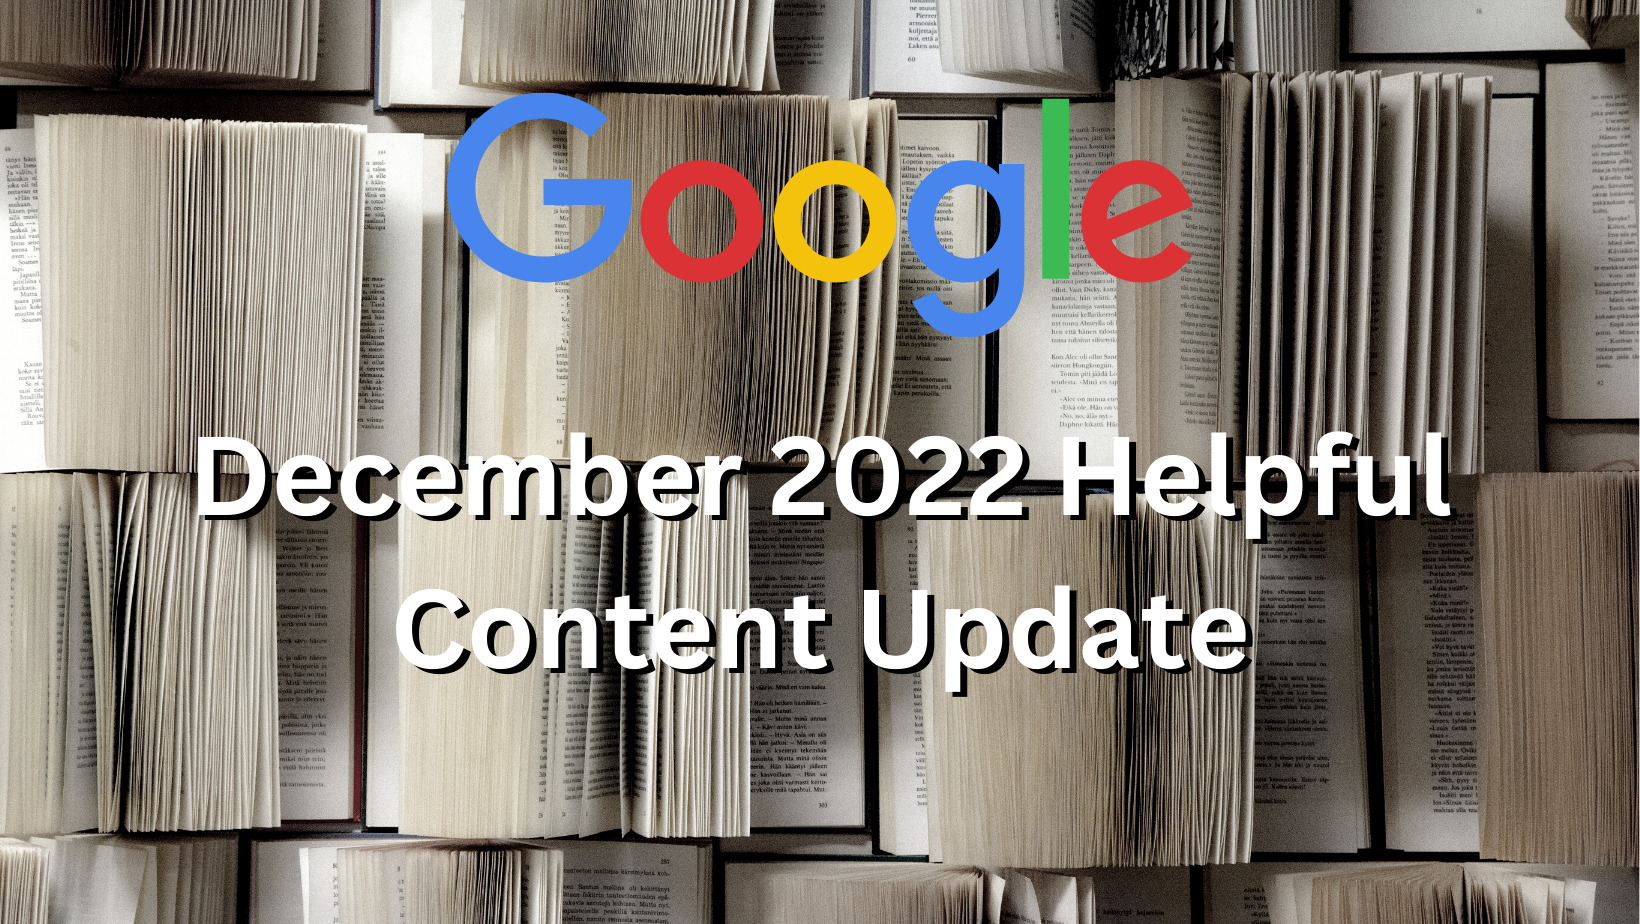 Open books are in the background with the words "Google December 2022 Helpful Content Update" imposed on top of them.